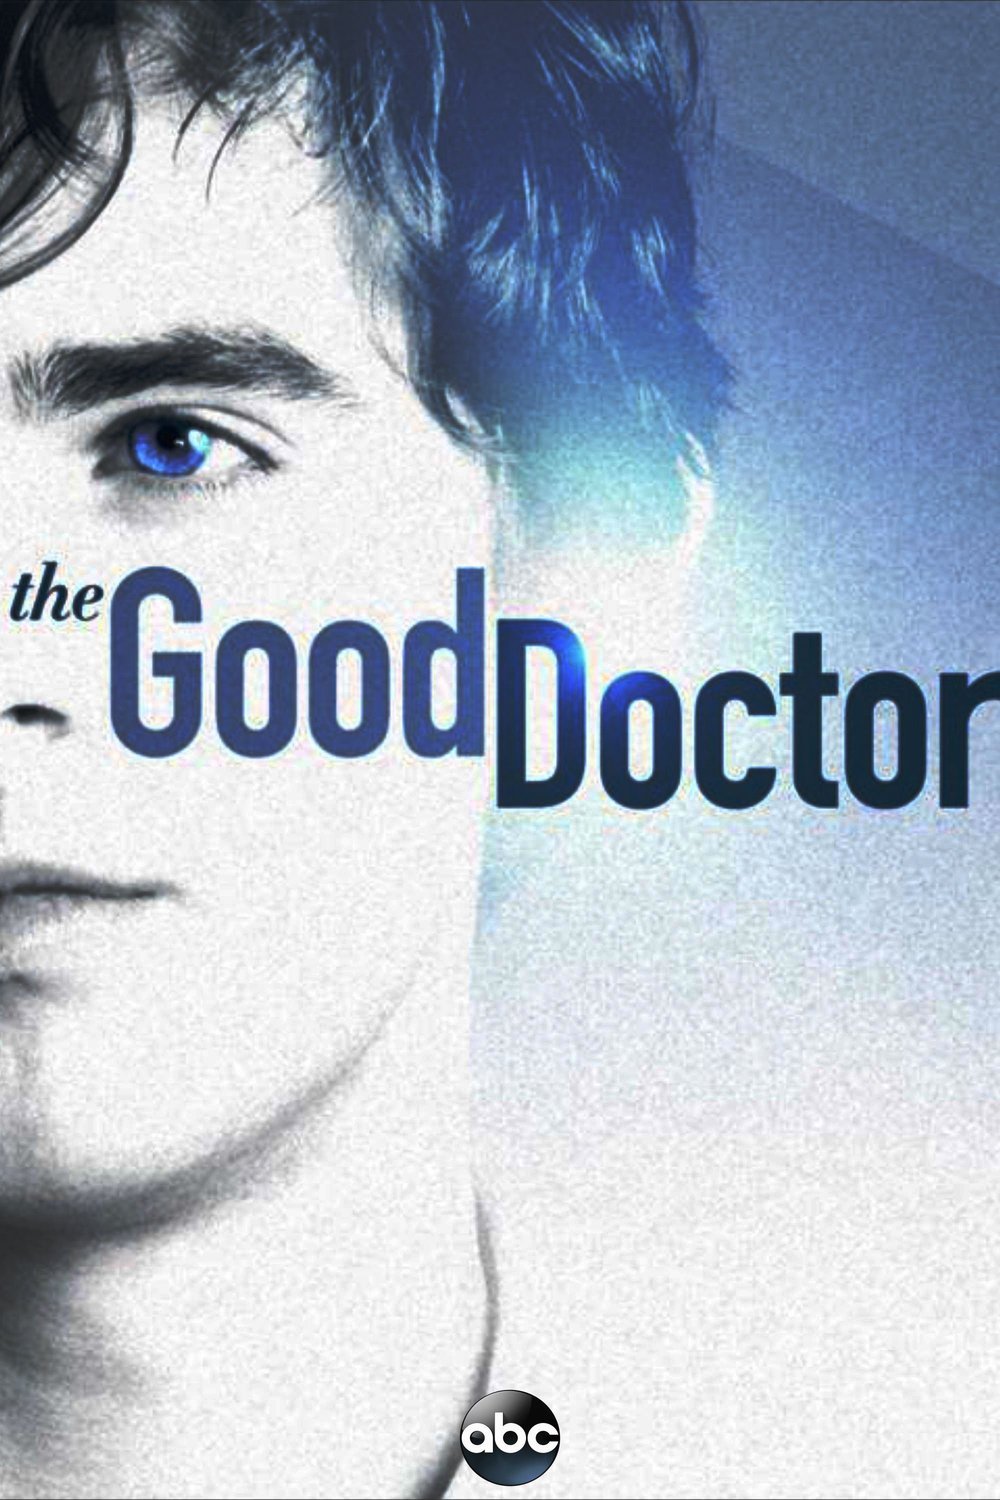 The Good Doctor TV series